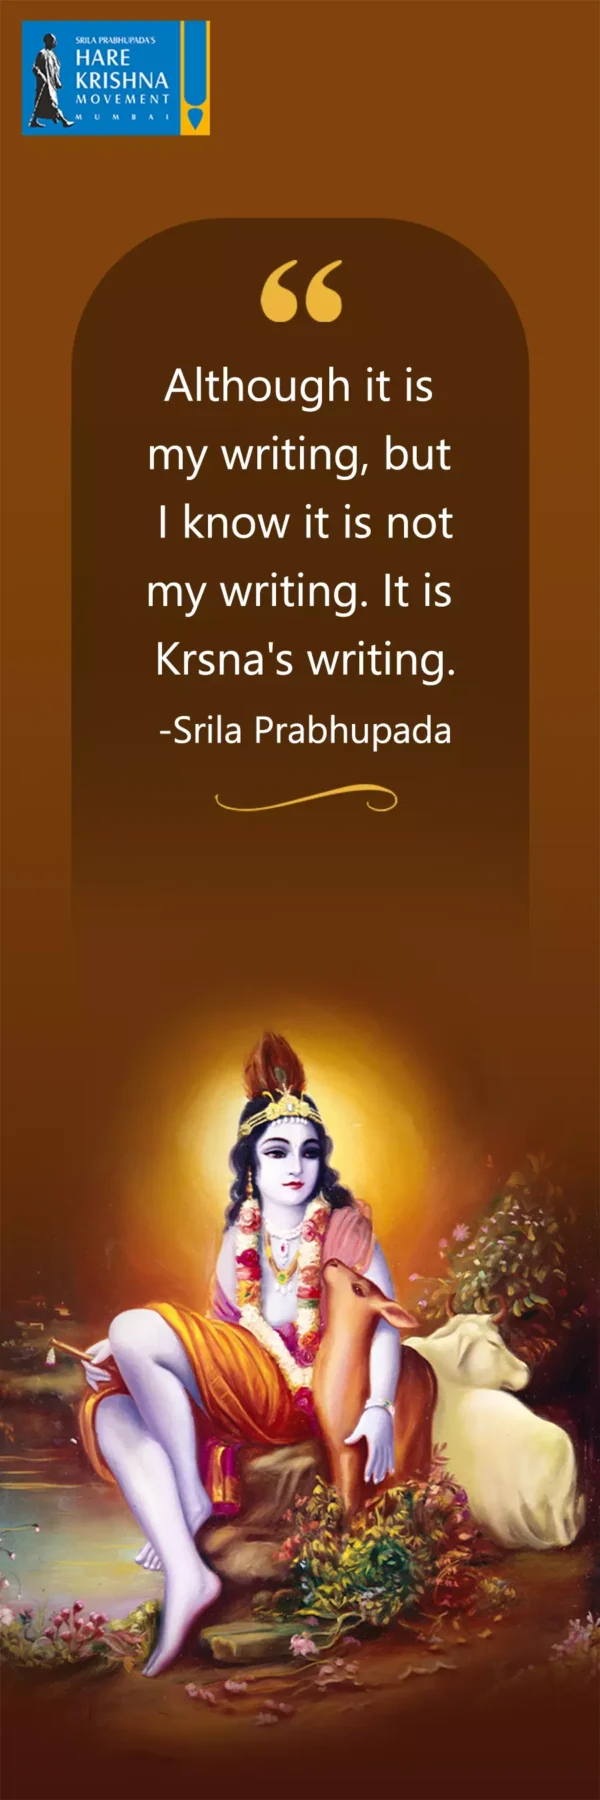 Although it is my writing, but I know it is not my writing. It is Krsna's writing.